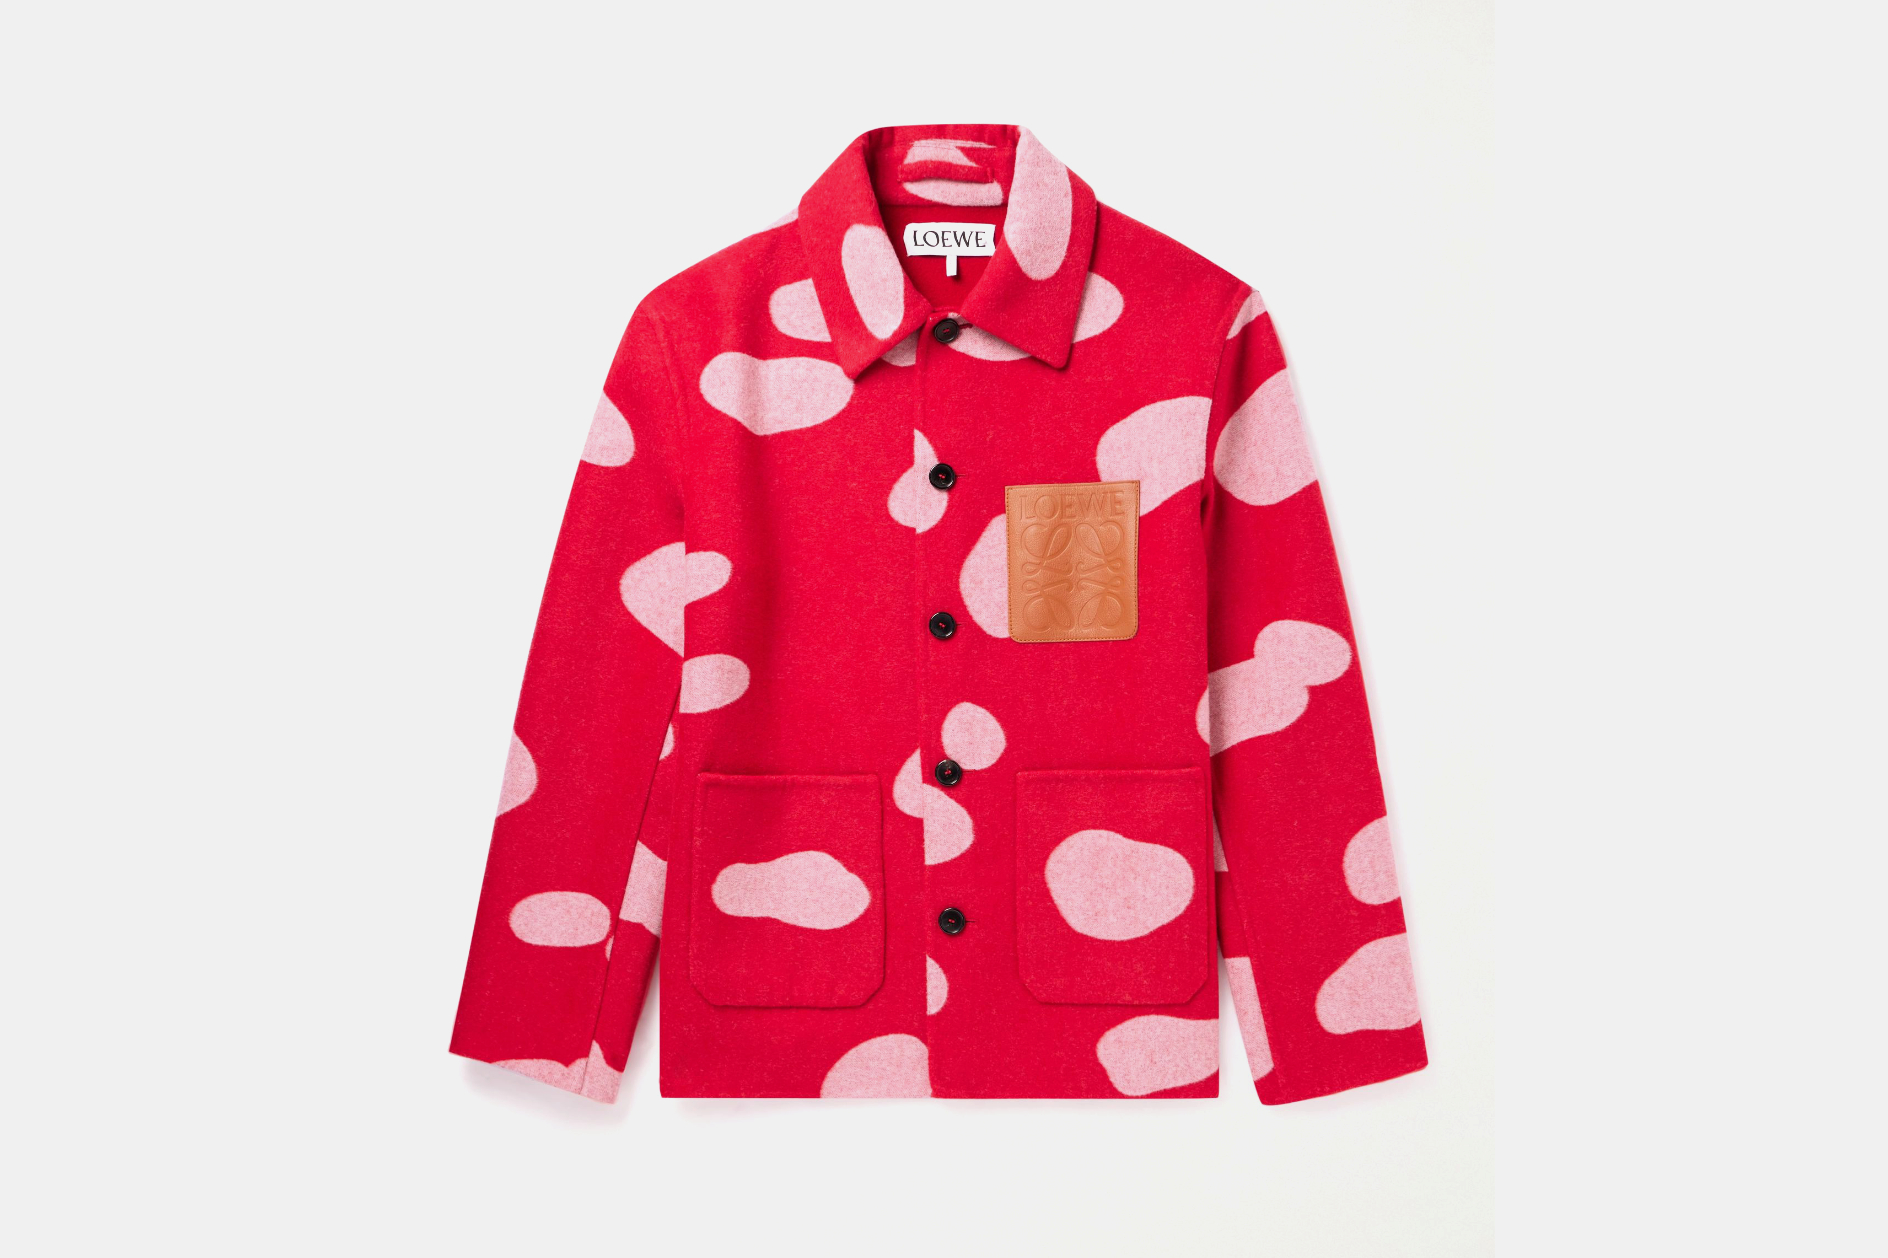 Loewe Chore Jacket in Red and Pink